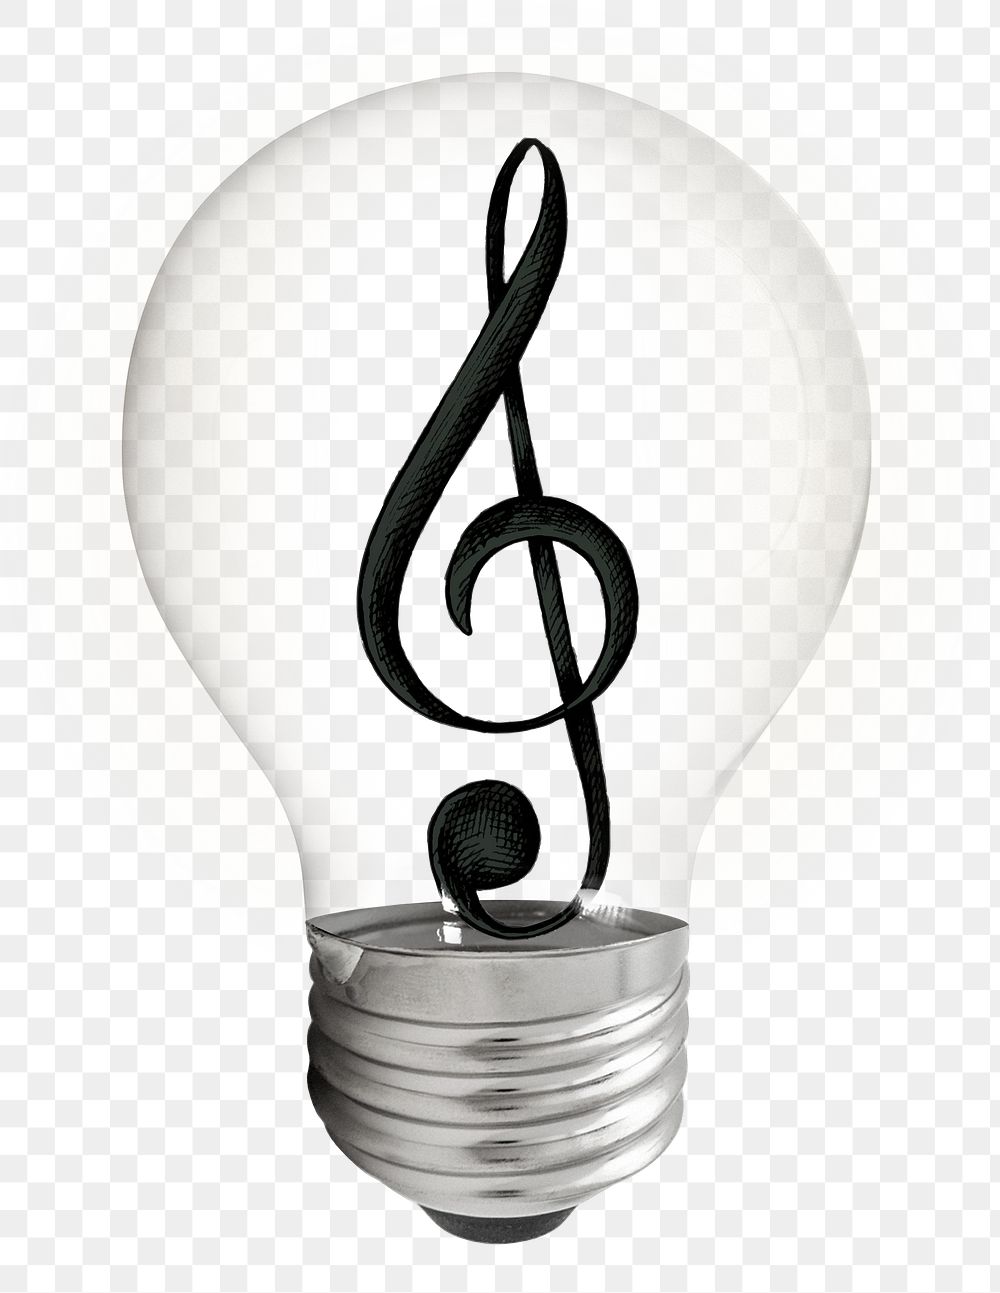 Music note icon png light bulb sticker, media symbol graphic on transparent background